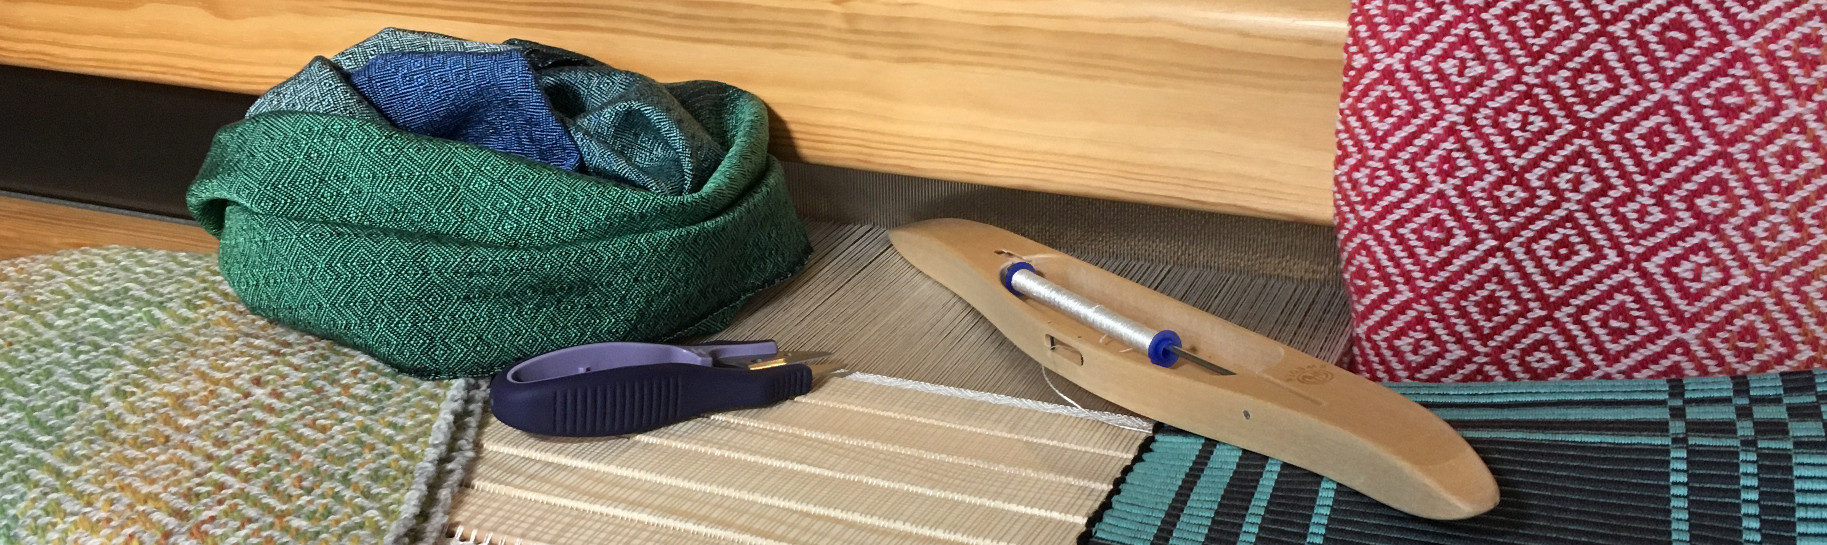 Banner image showing handwoven textiles and weaving tools on top of an in-progress project in the loom.